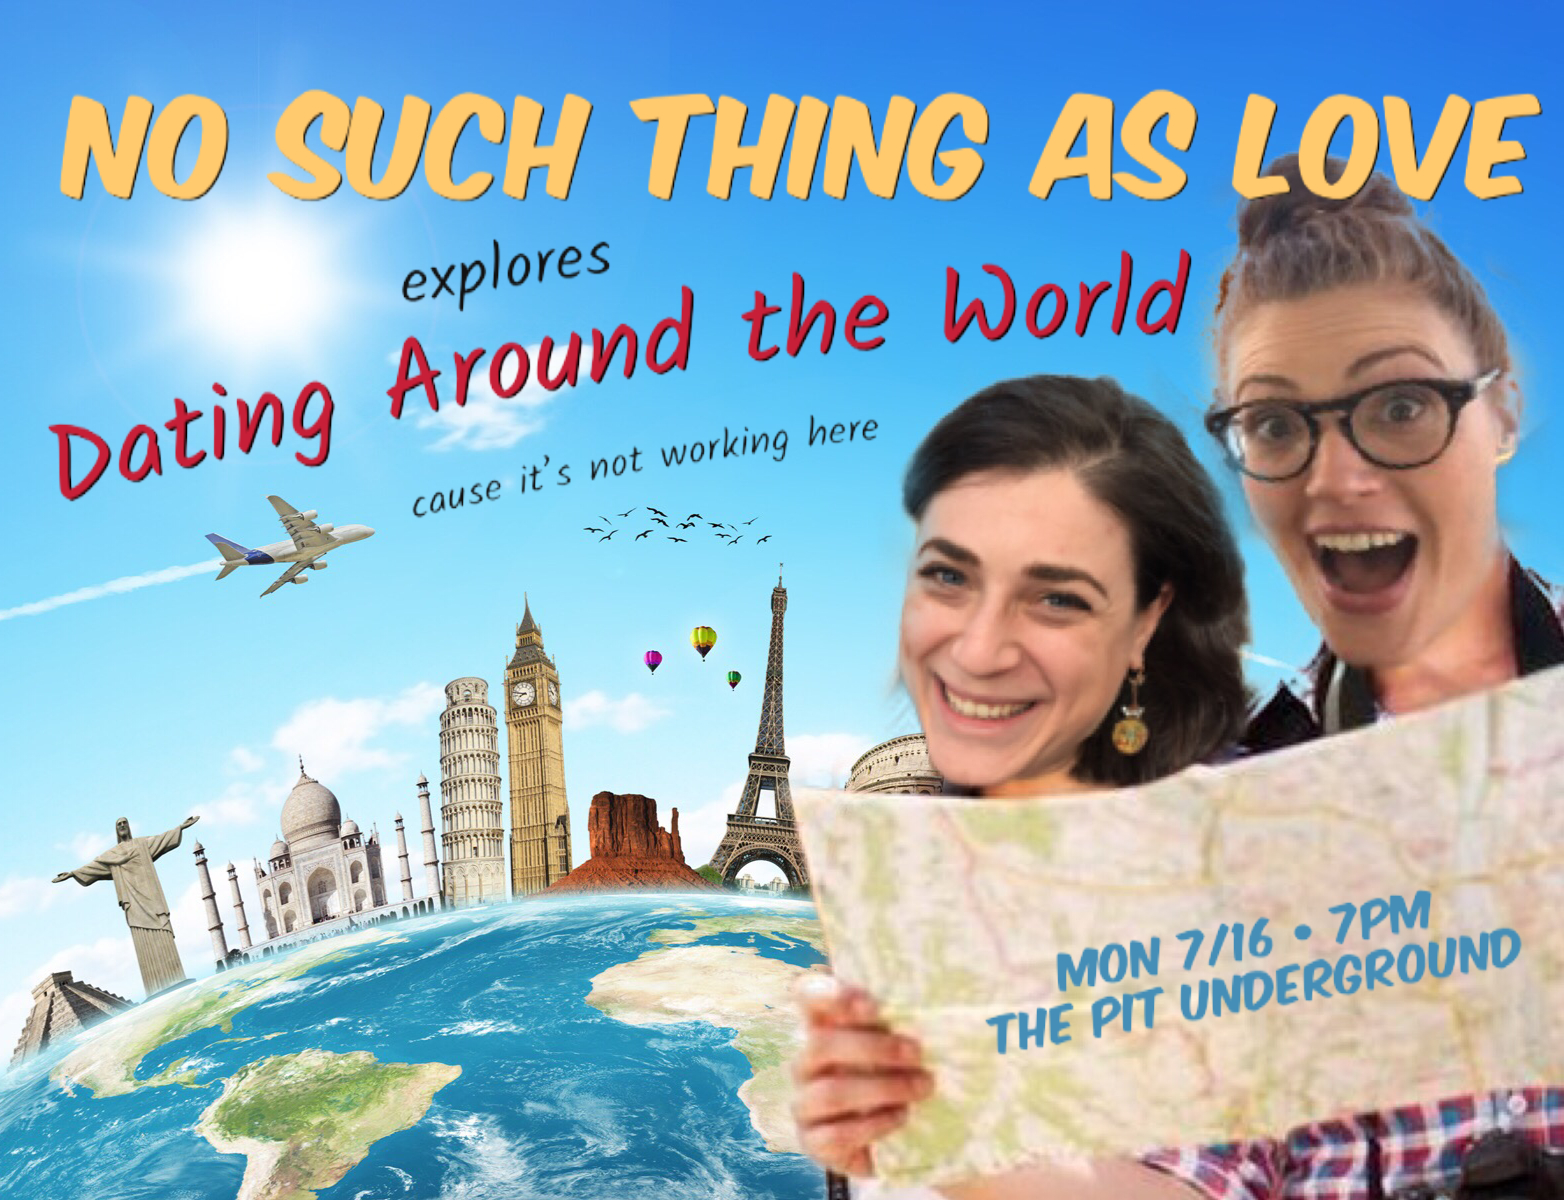 No Such Thing as Love: Dating Around the World